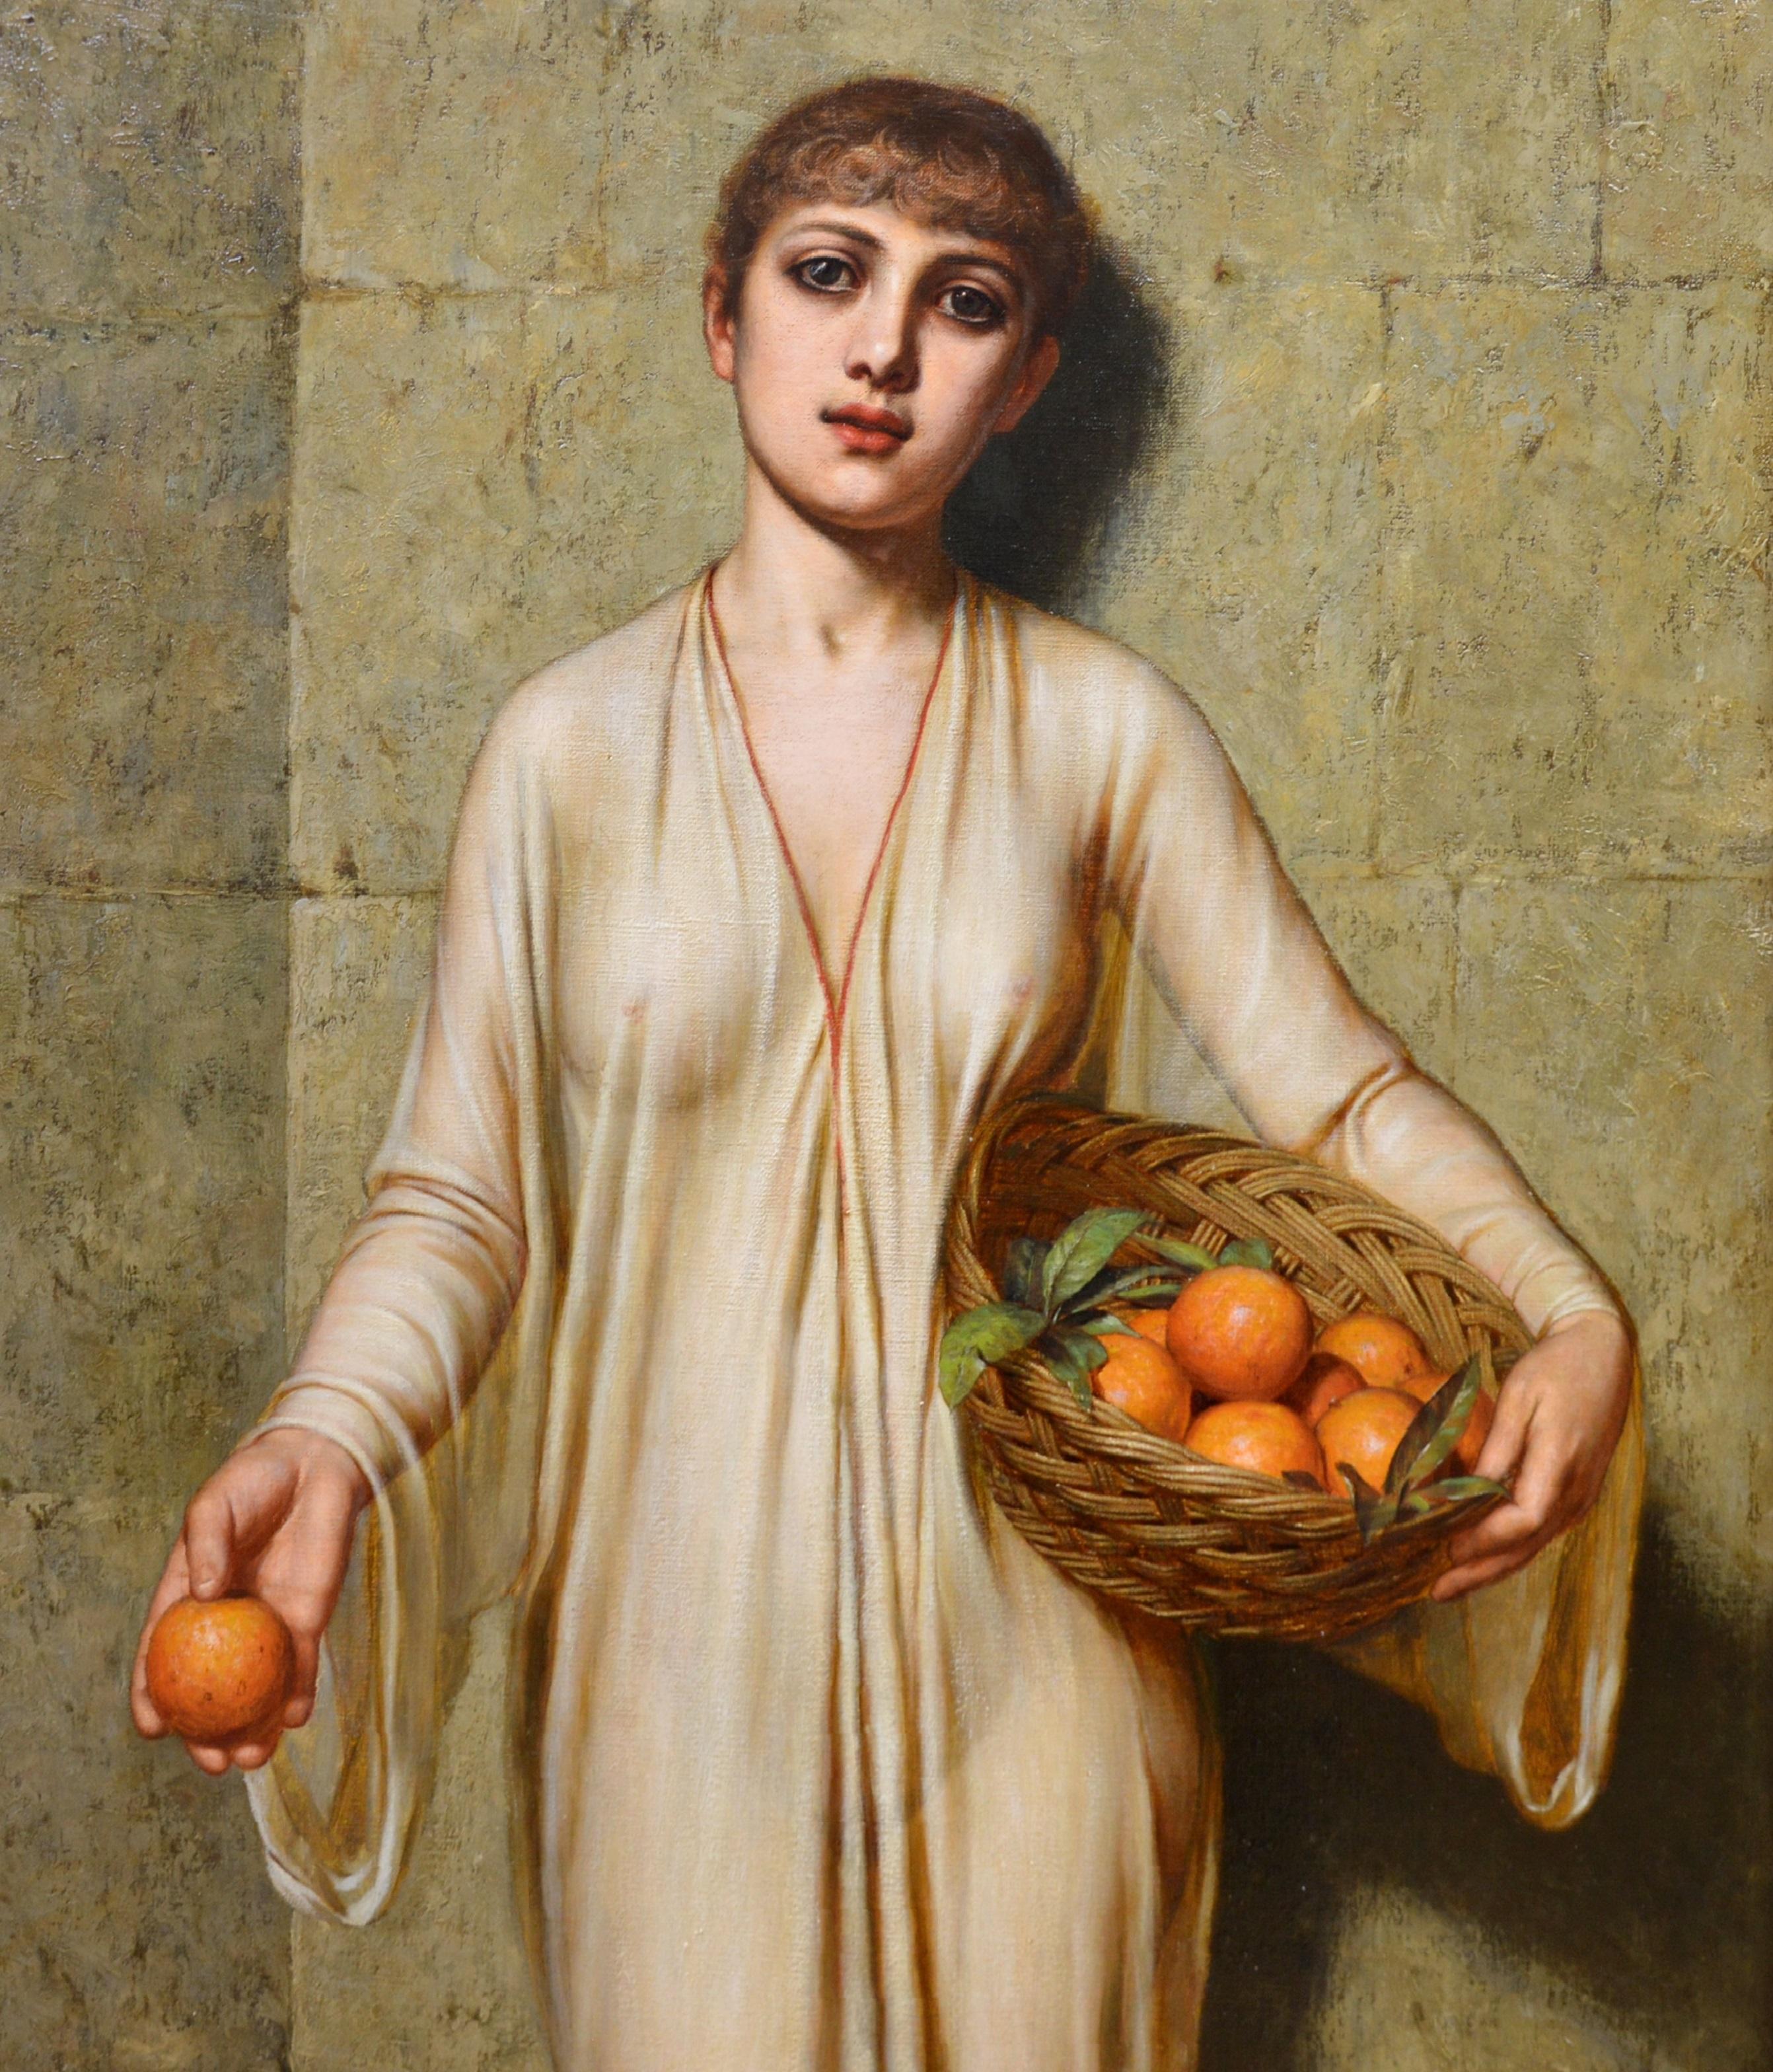 Oranges - 19th Century Neoclassical Portrait Oil Painting of Young Roman Girl - Brown Figurative Painting by Arthur Hill